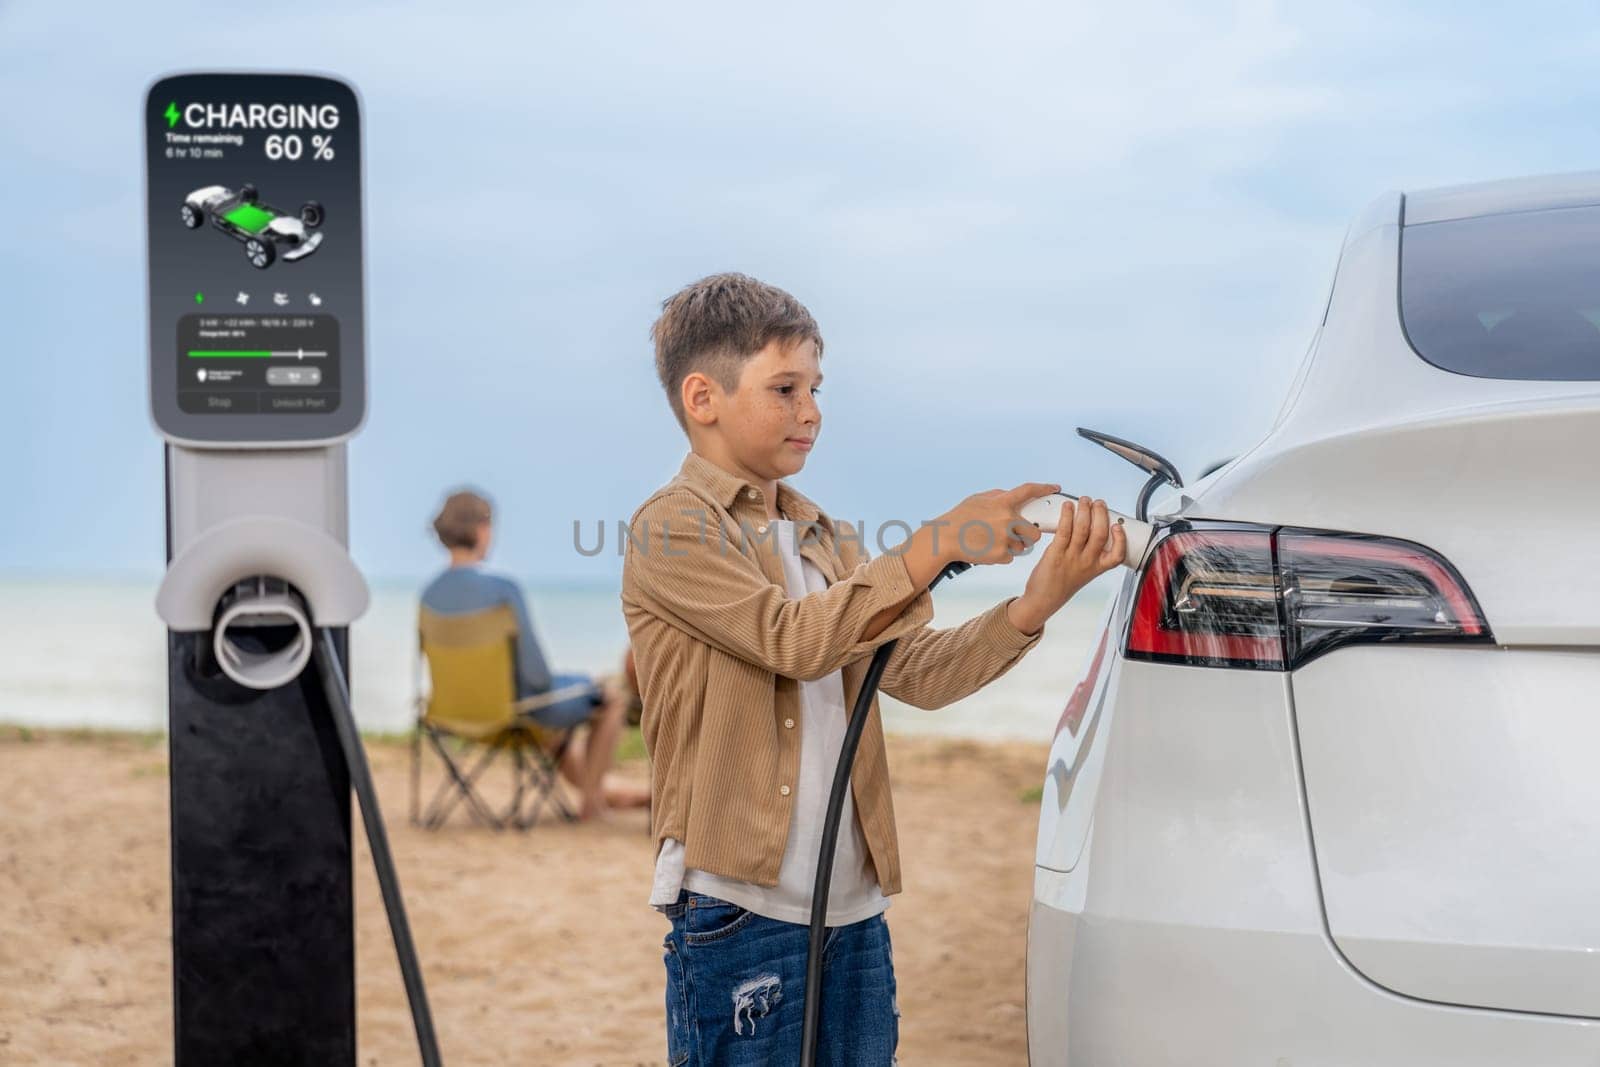 Family vacation trip traveling by the beach with electric car, little boy recharge EV car while his family enjoy seascape beach. Family trip with alternative energy and eco-friendly car. Perpetual